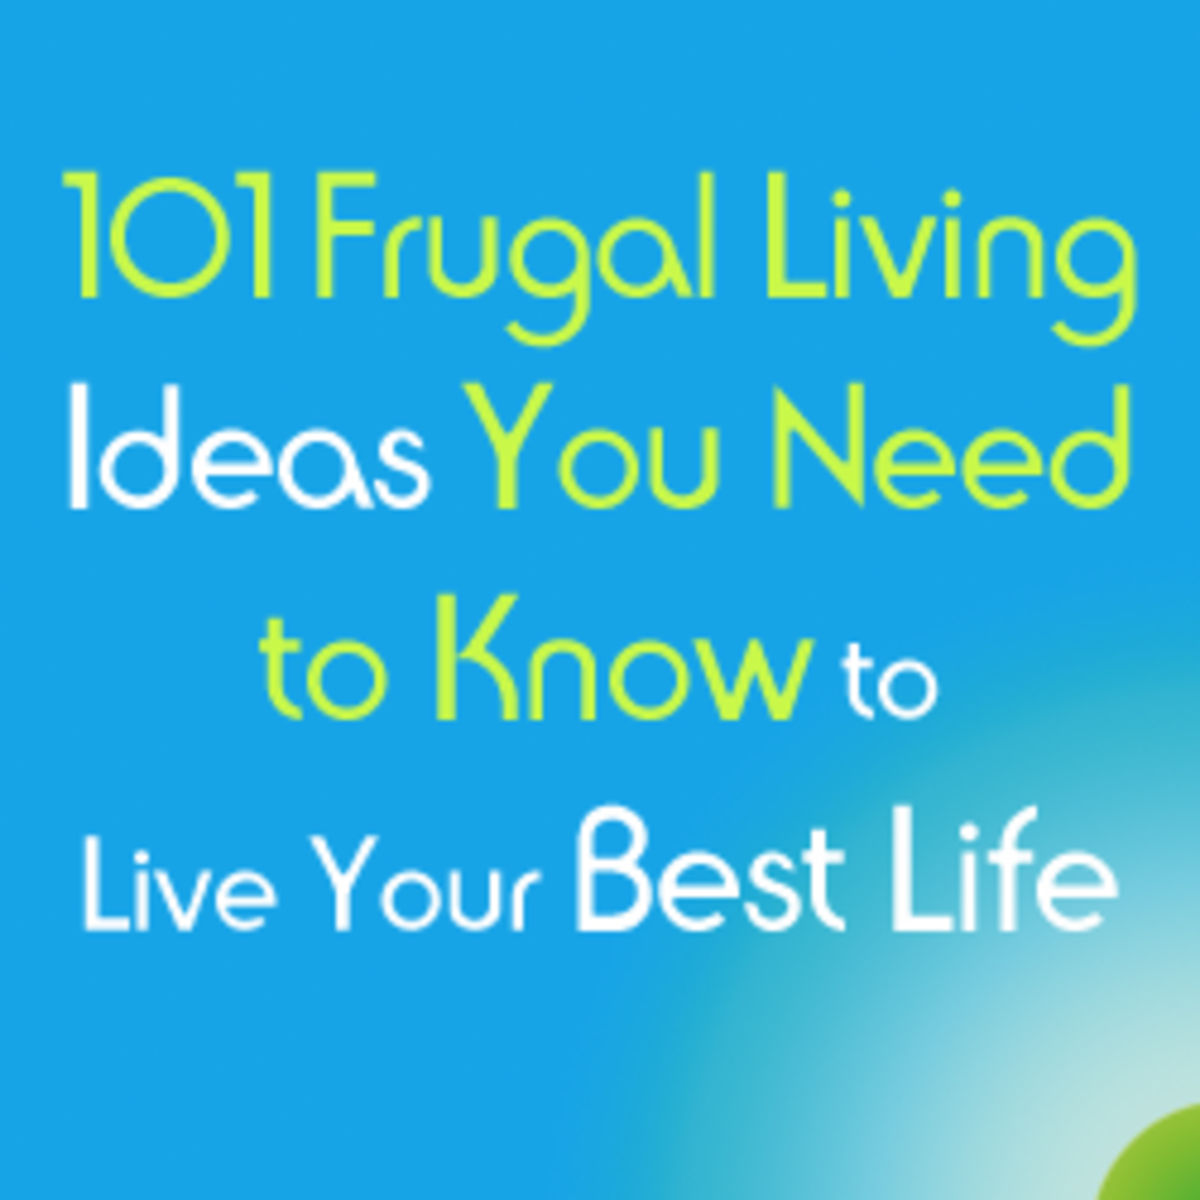 101 Frugal Living Ideas to Improve Your Life